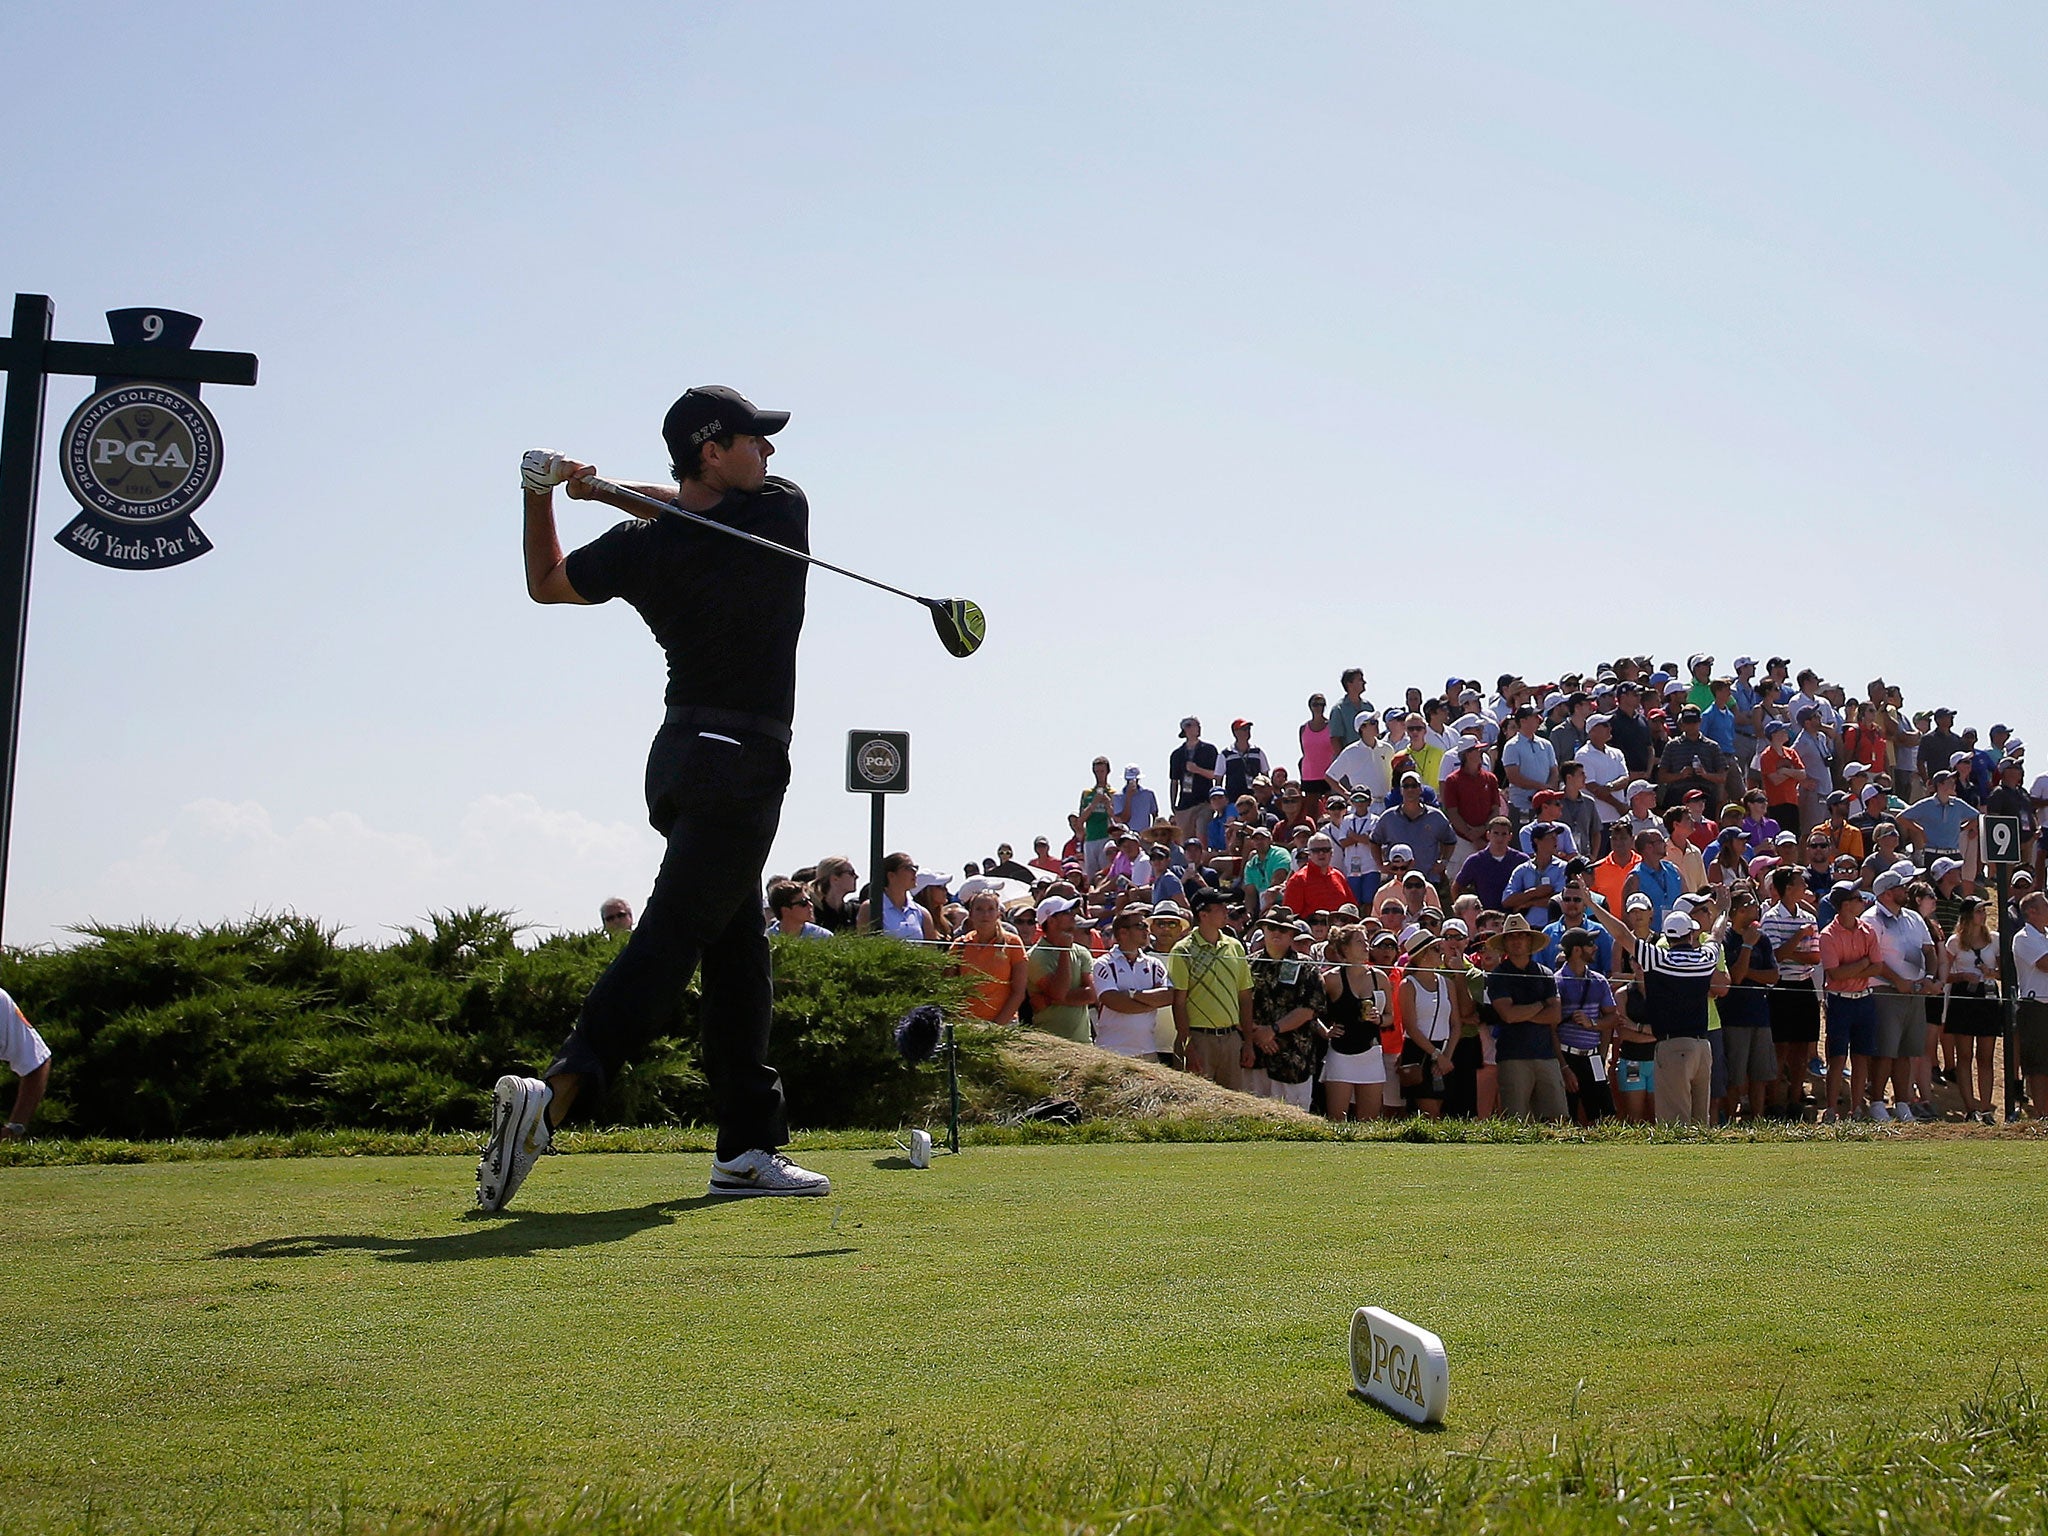 Rory McIlroy hits a drive on the ninth hole during the third round of the PGA Championship at Whistling Straits